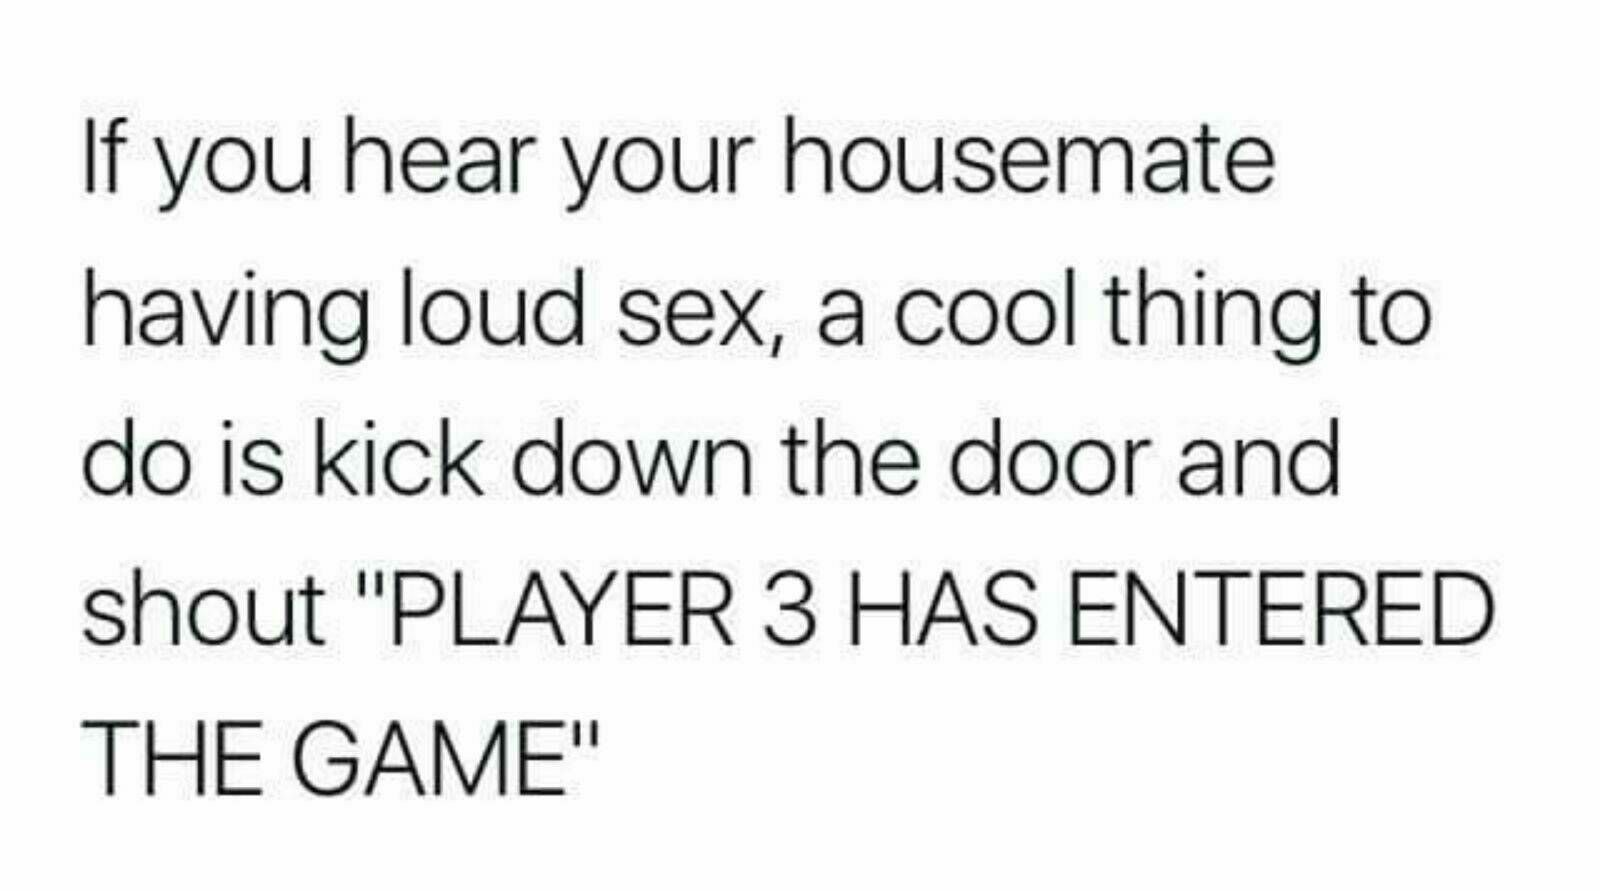 number - If you hear your housemate having loud sex, a cool thing to do is kick down the door and shout "Player 3 Has Entered The Game"